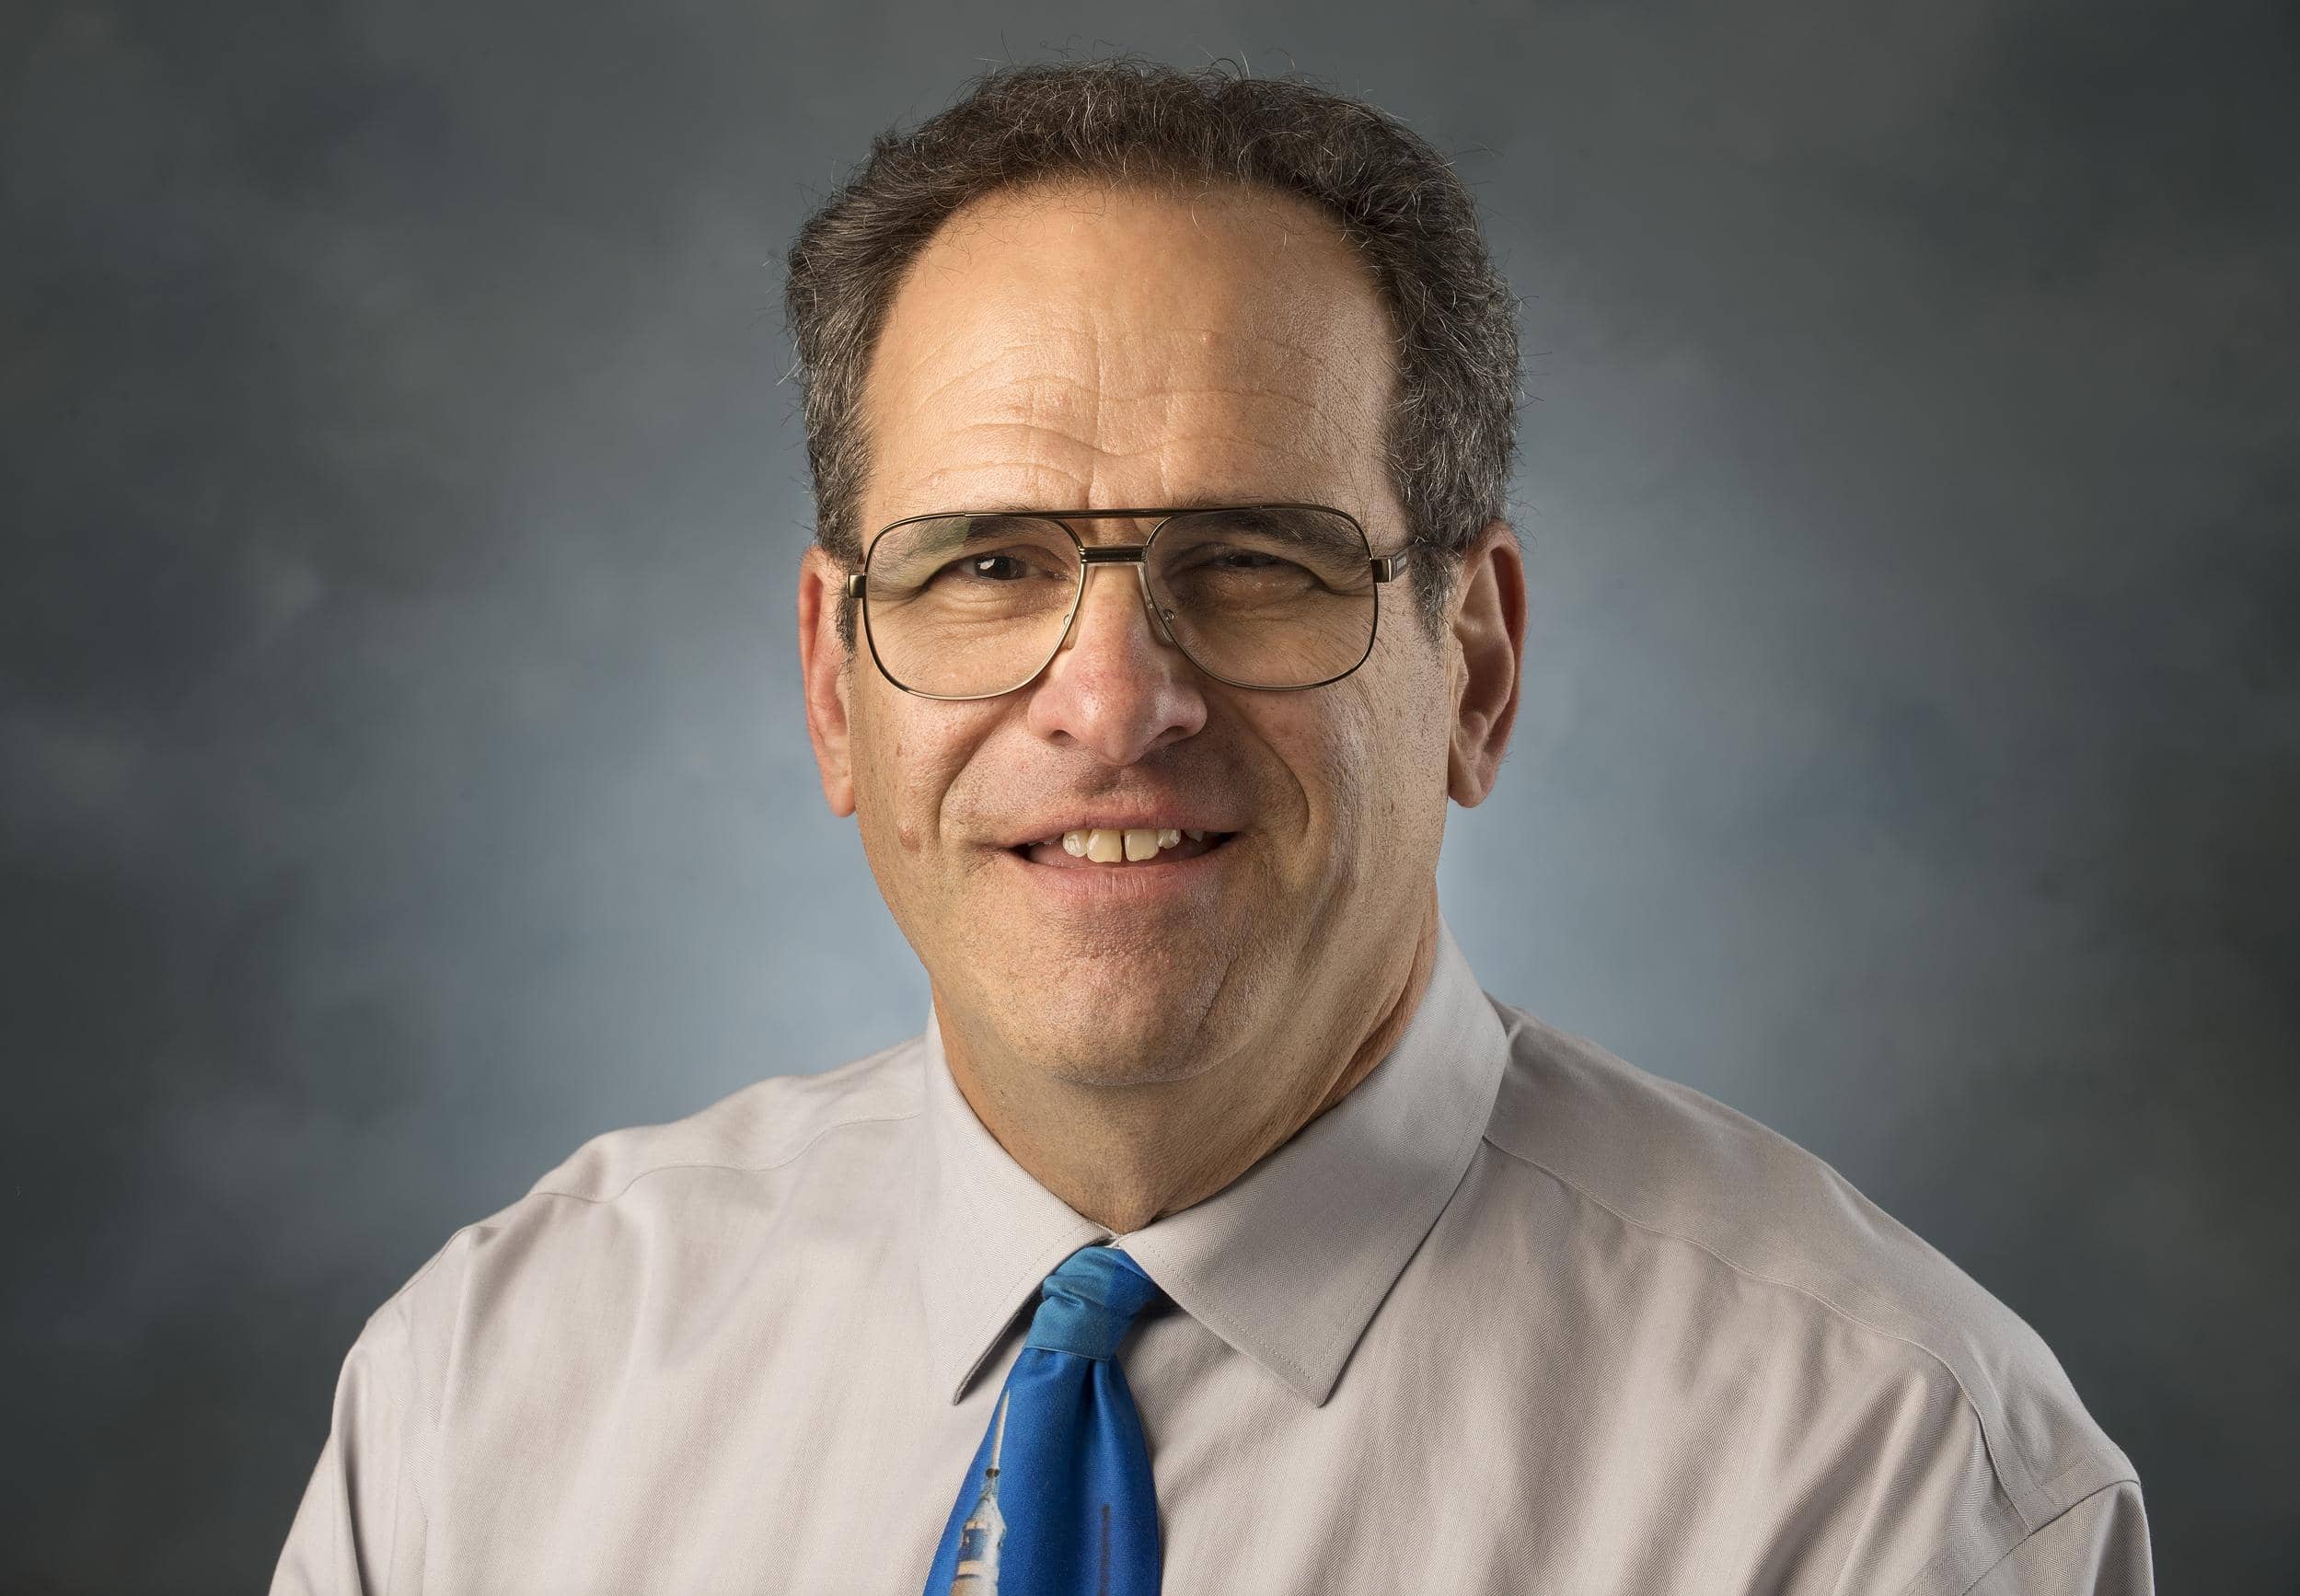 A profile picture of Don Edberg, Ph.D. He is a white, middle-aged male with glasses.